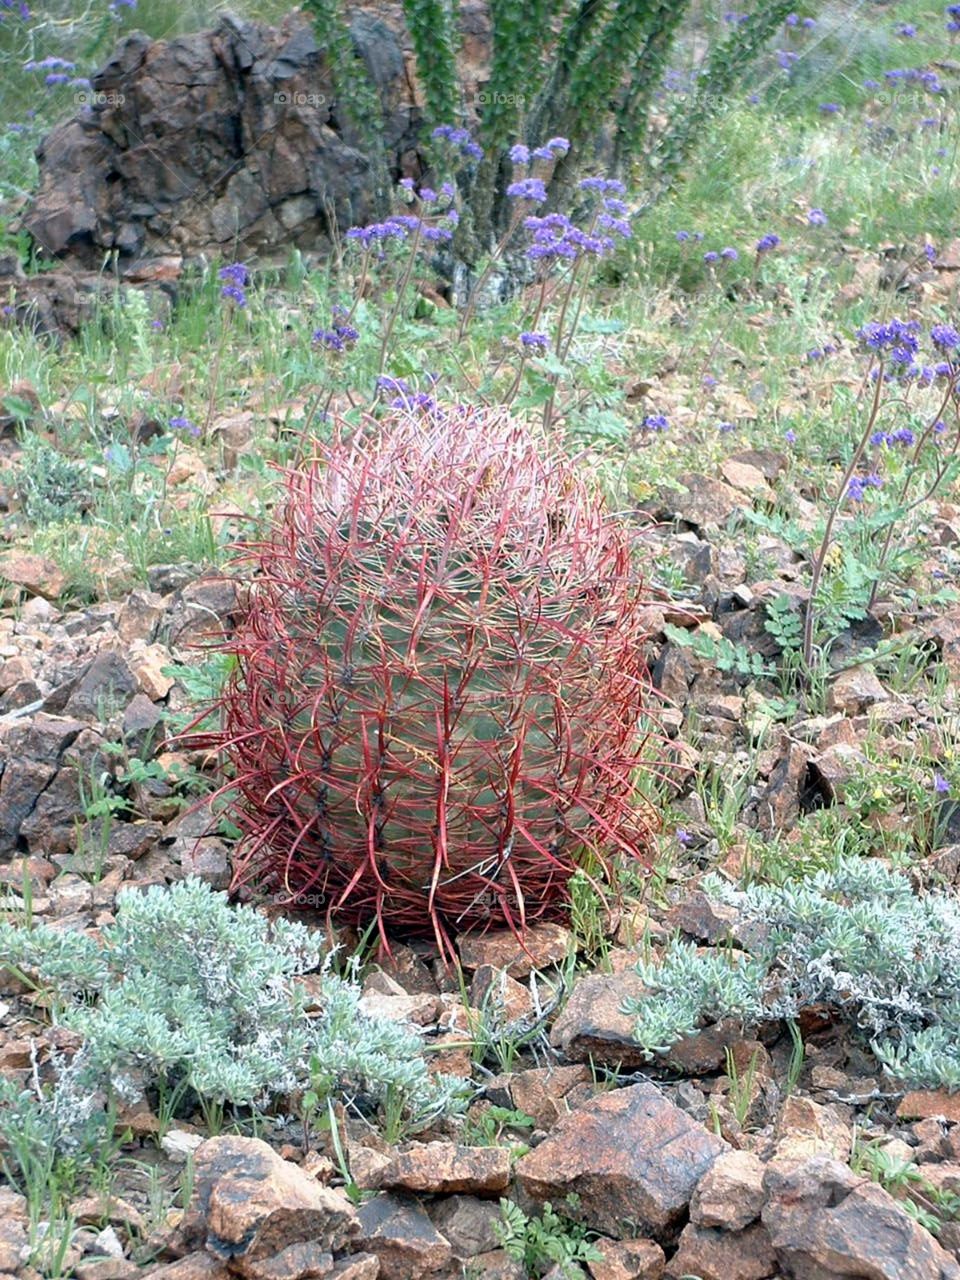 Castle Dome Mtn AZ_058. Hiking during cactus blooming season at Castle Dome Mountain